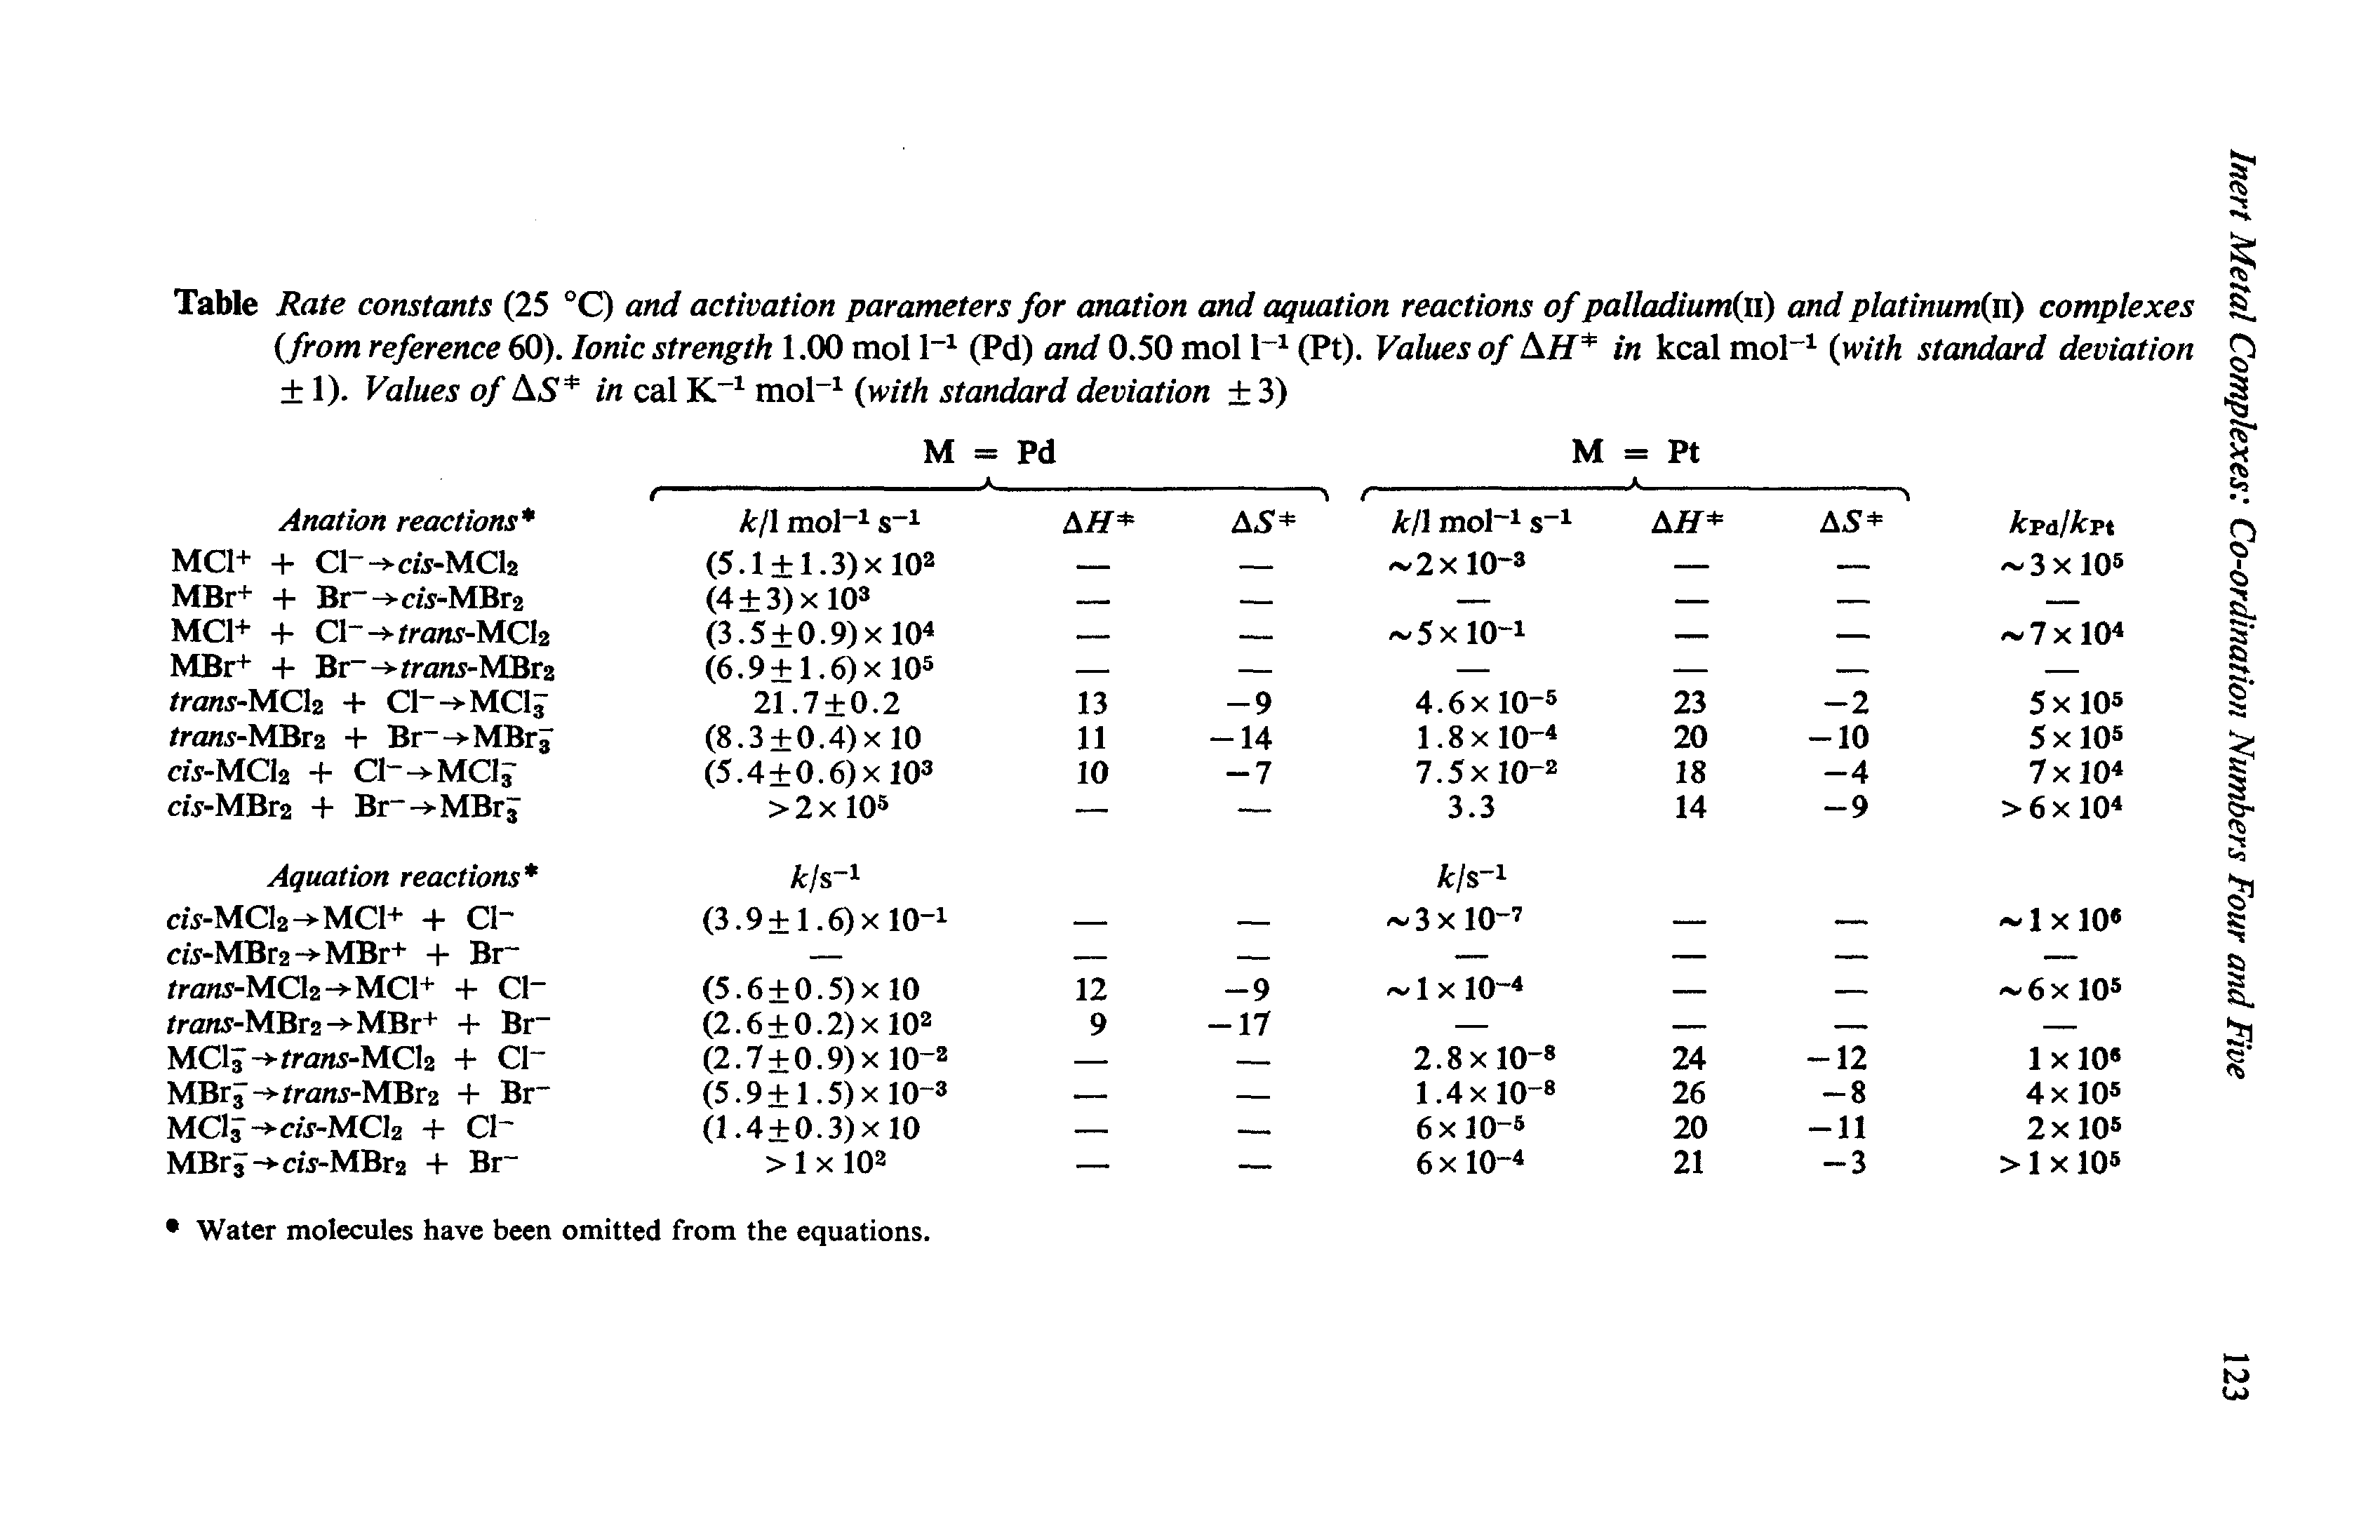 Table Rate constants (25 °C) and activation parameters for anation and aquation reactions of palladium(ii) and platinum(n) complexes from reference 60). Ionic strength 1.00 mol 1 (Pd) and 0.50 mol 1 (Pt). Values of in kcal mol (with standard deviation 1). Values of A5 in cal mol with standard deviation 3)...